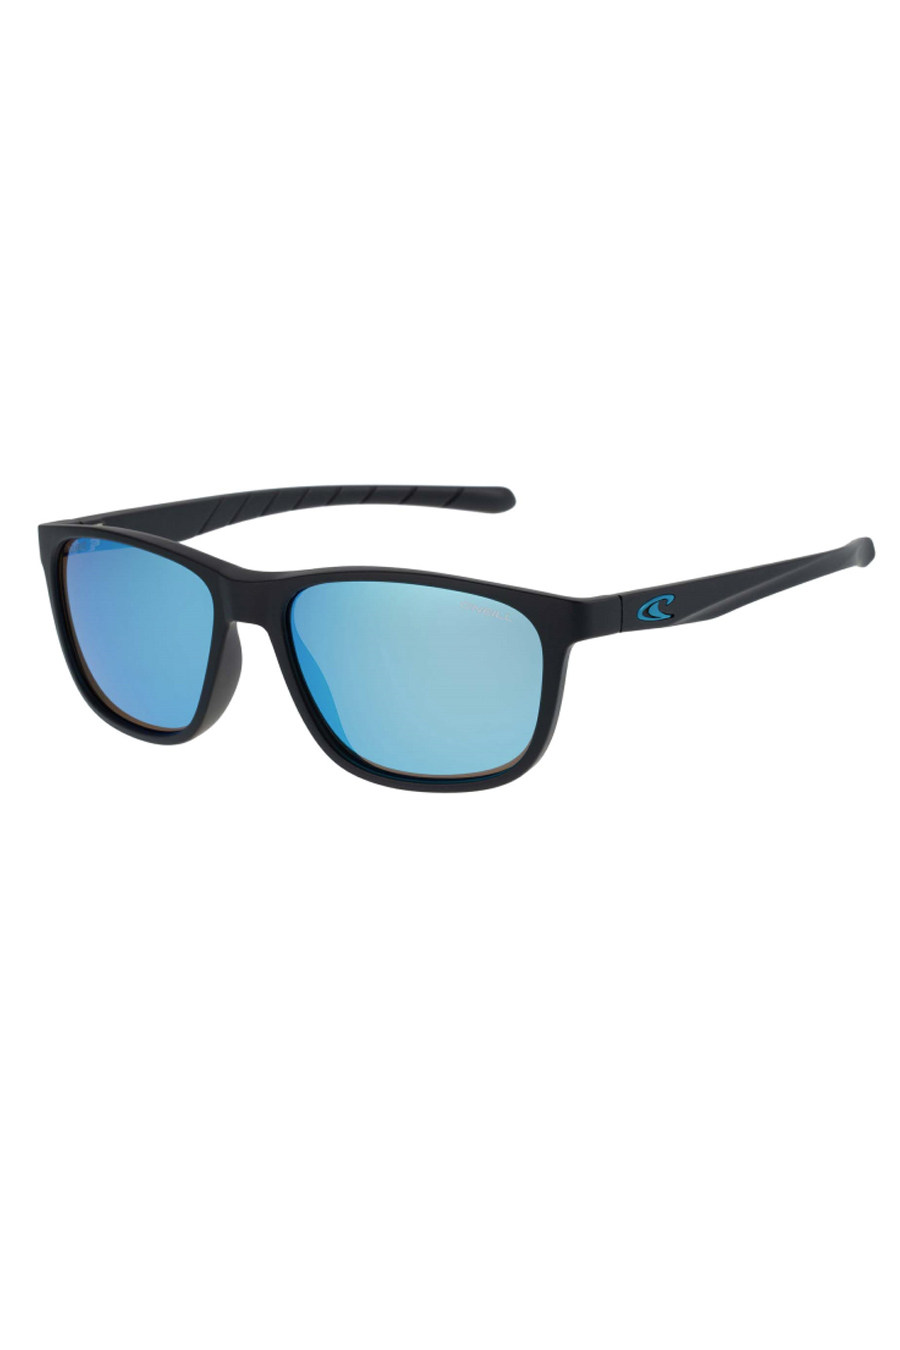 Saulesbrilles ONEILL ONS-9025-20-104P